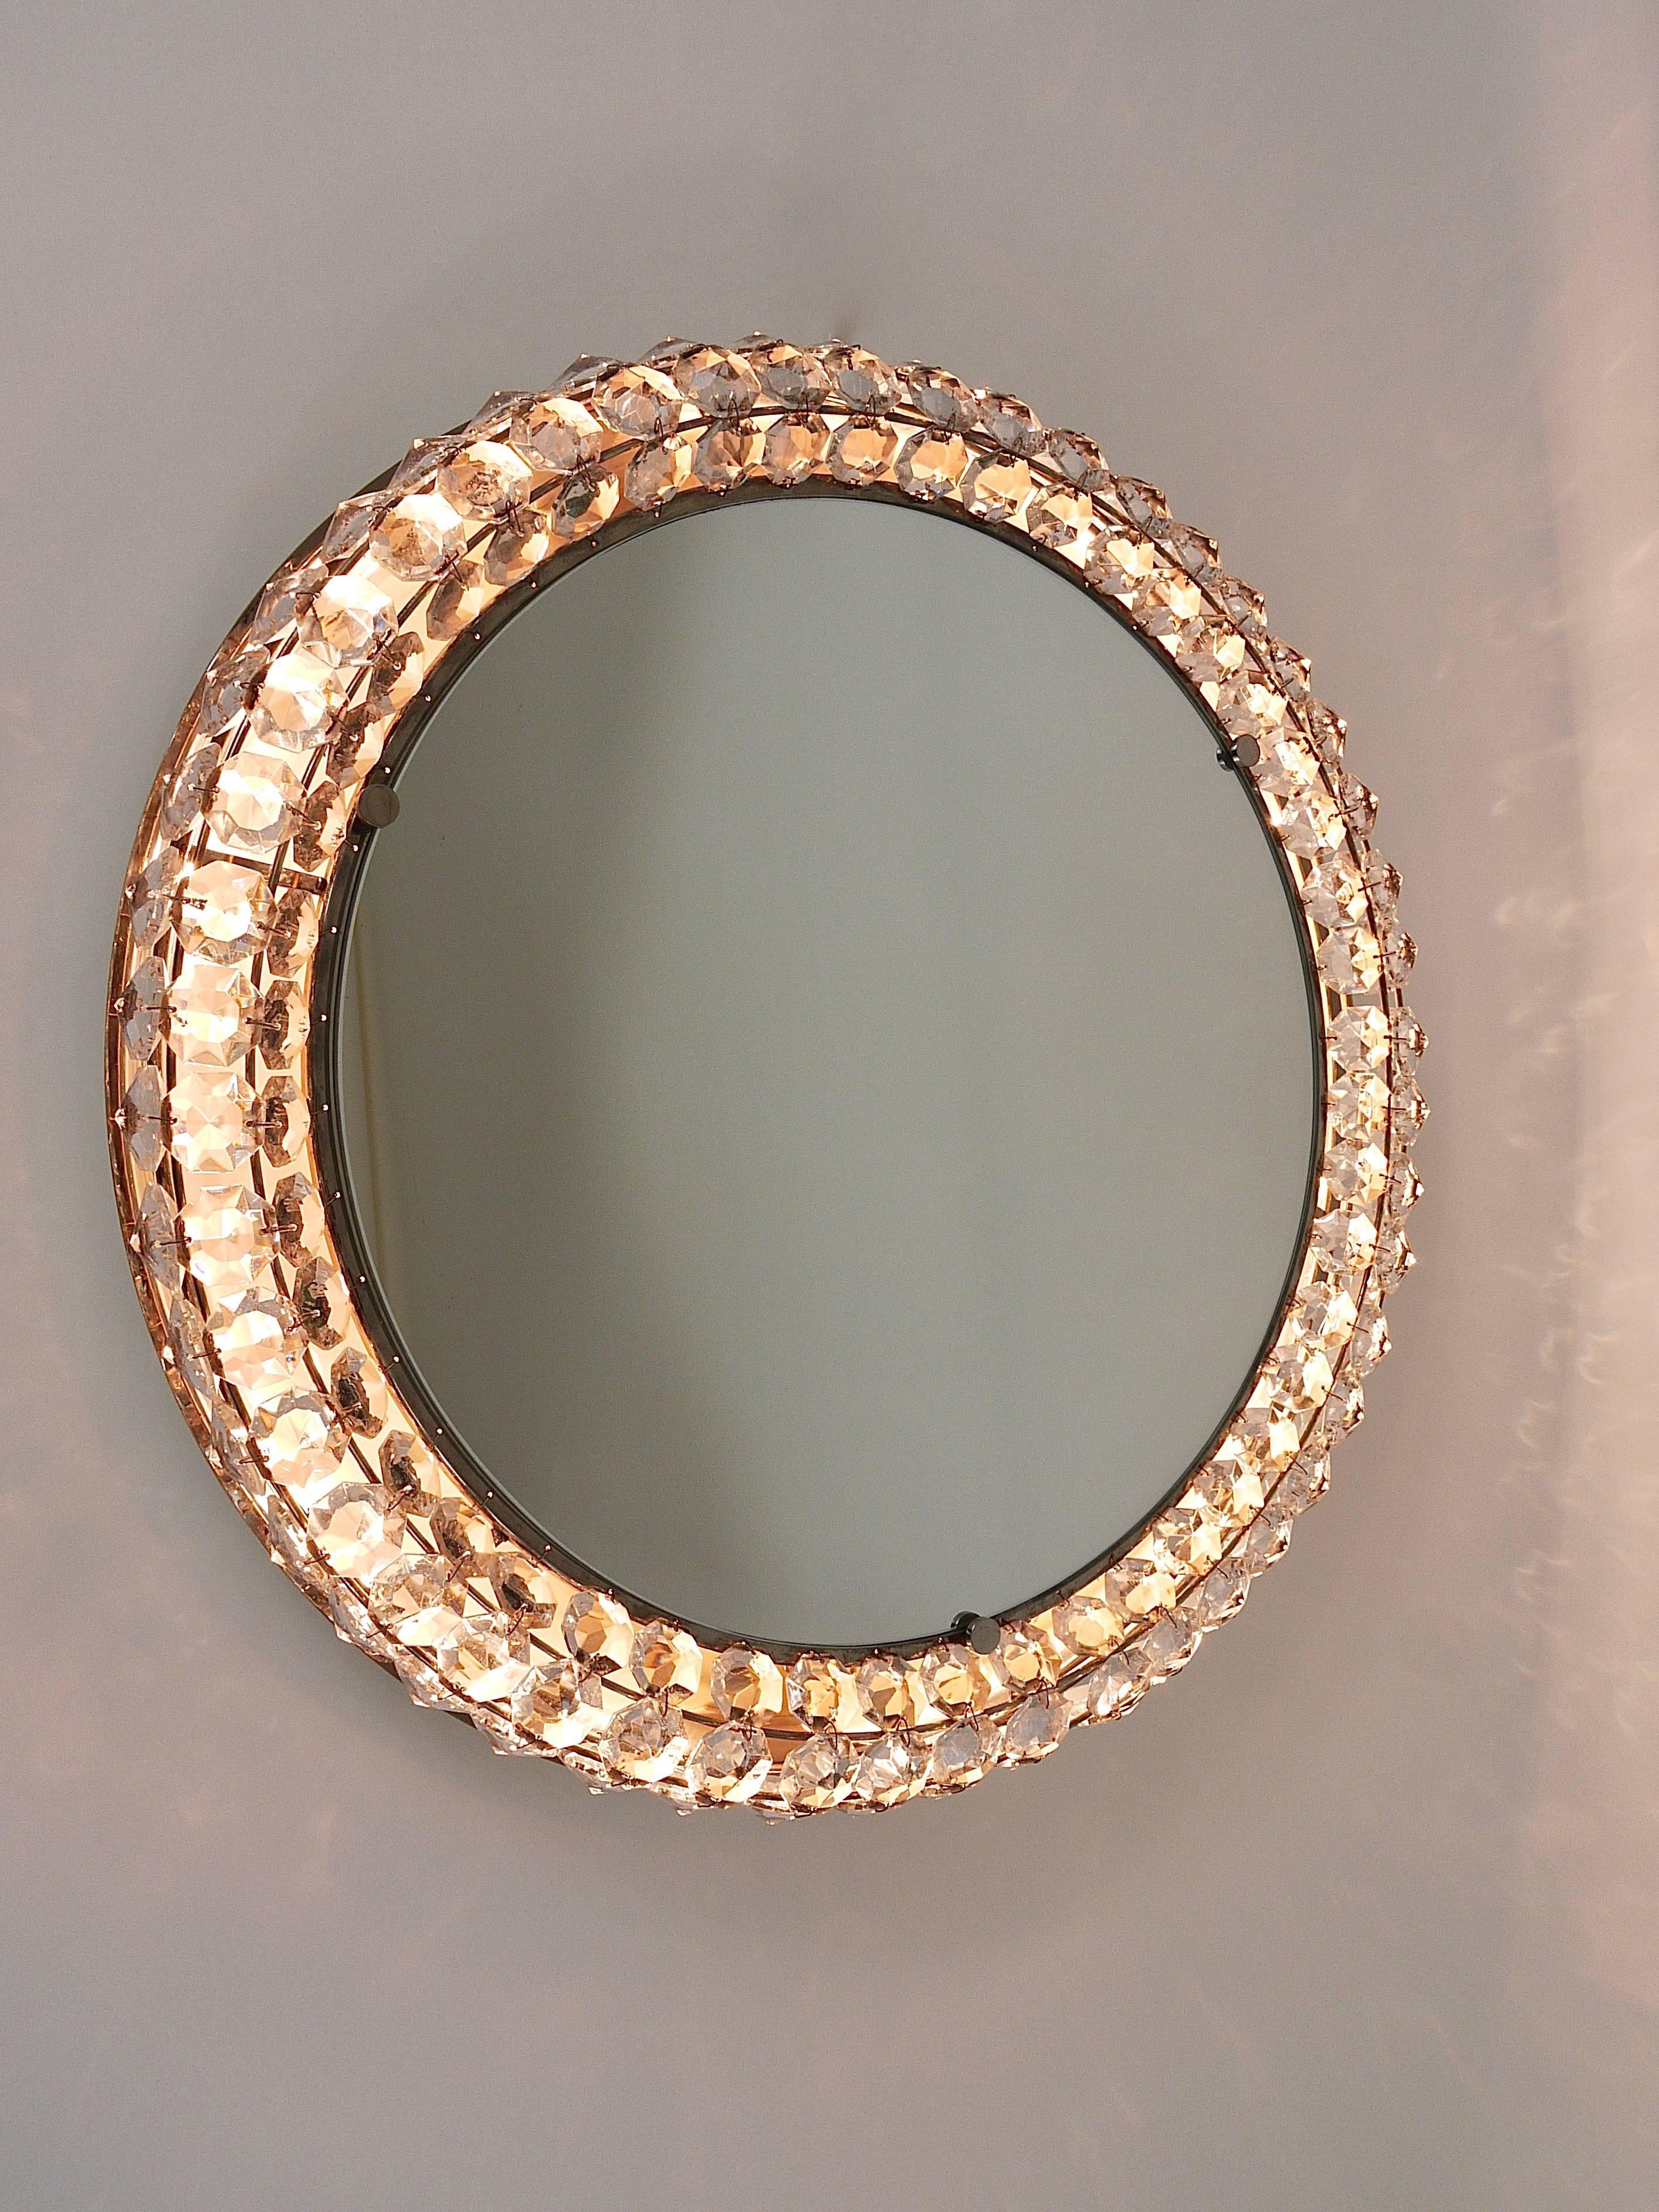 A beautiful round Mid-Century wall mirror with a frame covered with three rows of diamond-shaped faceted crystals. Designed and executed by Bakalowits & Sohne in the 1950s. Incredible good quality, nickel-plated metal. The mirror takes up to 4